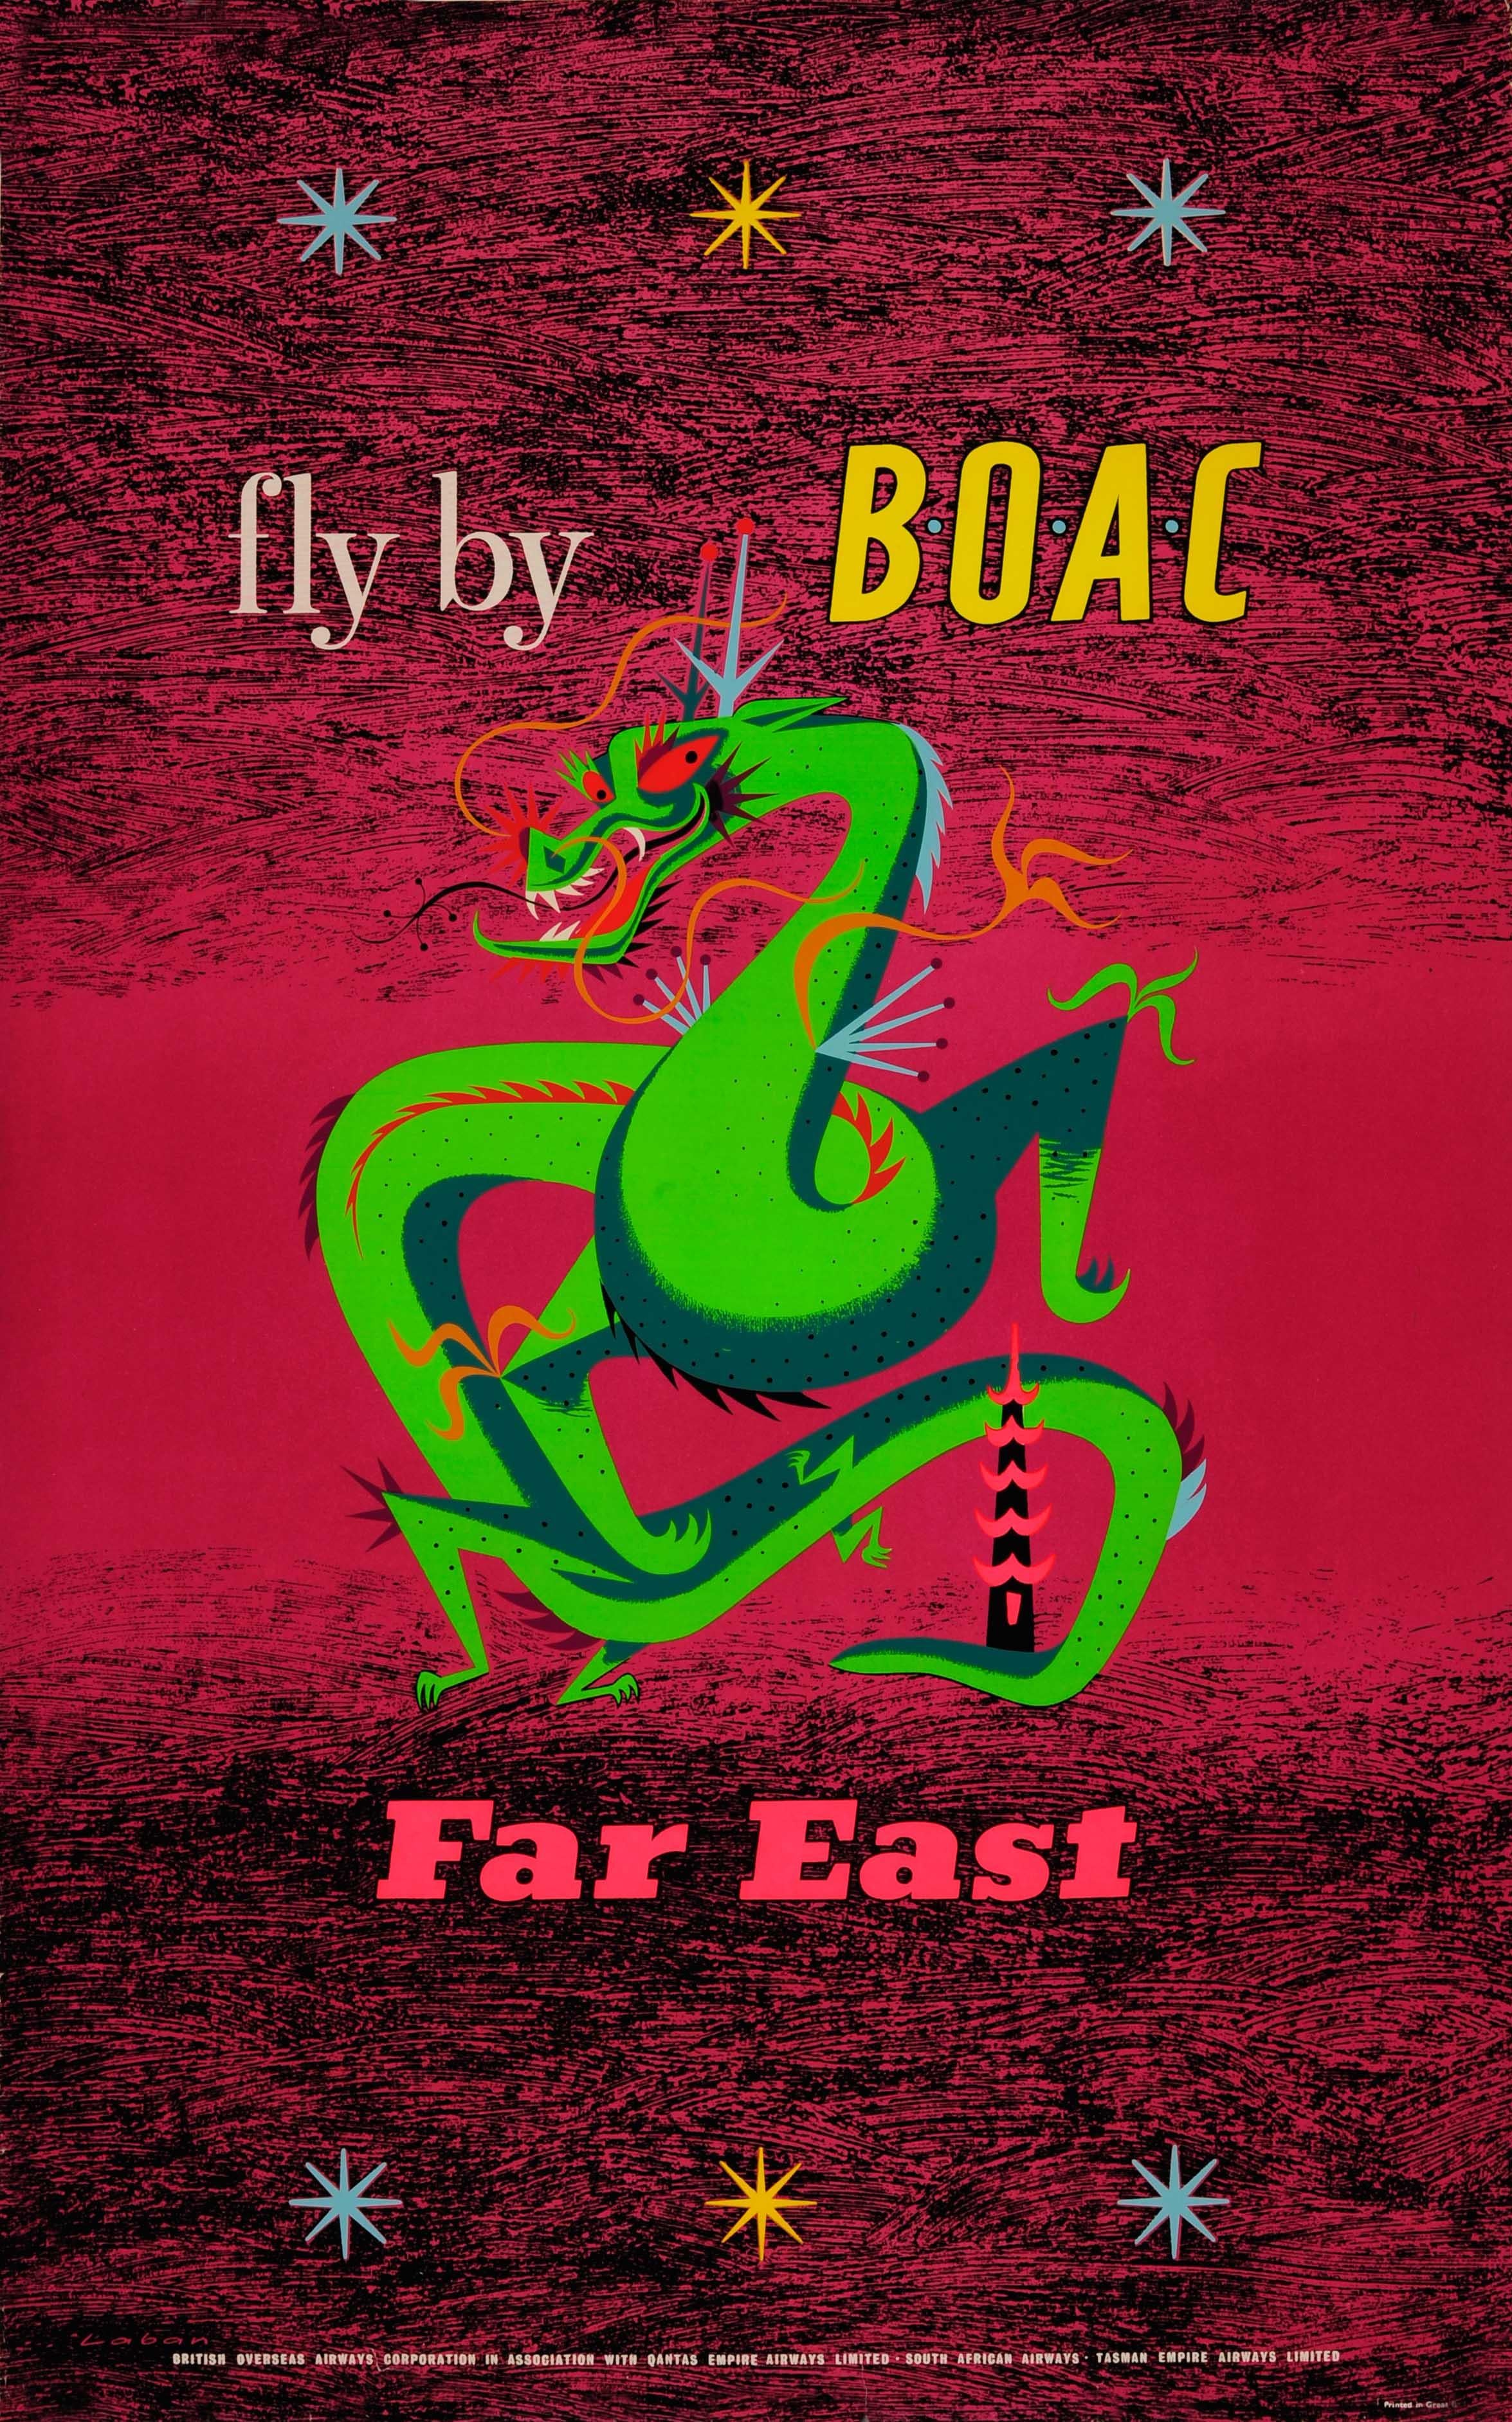 Maurice Laban Print - Original Vintage Air Travel Poster Fly By BOAC To The Far East ft. Dragon Design